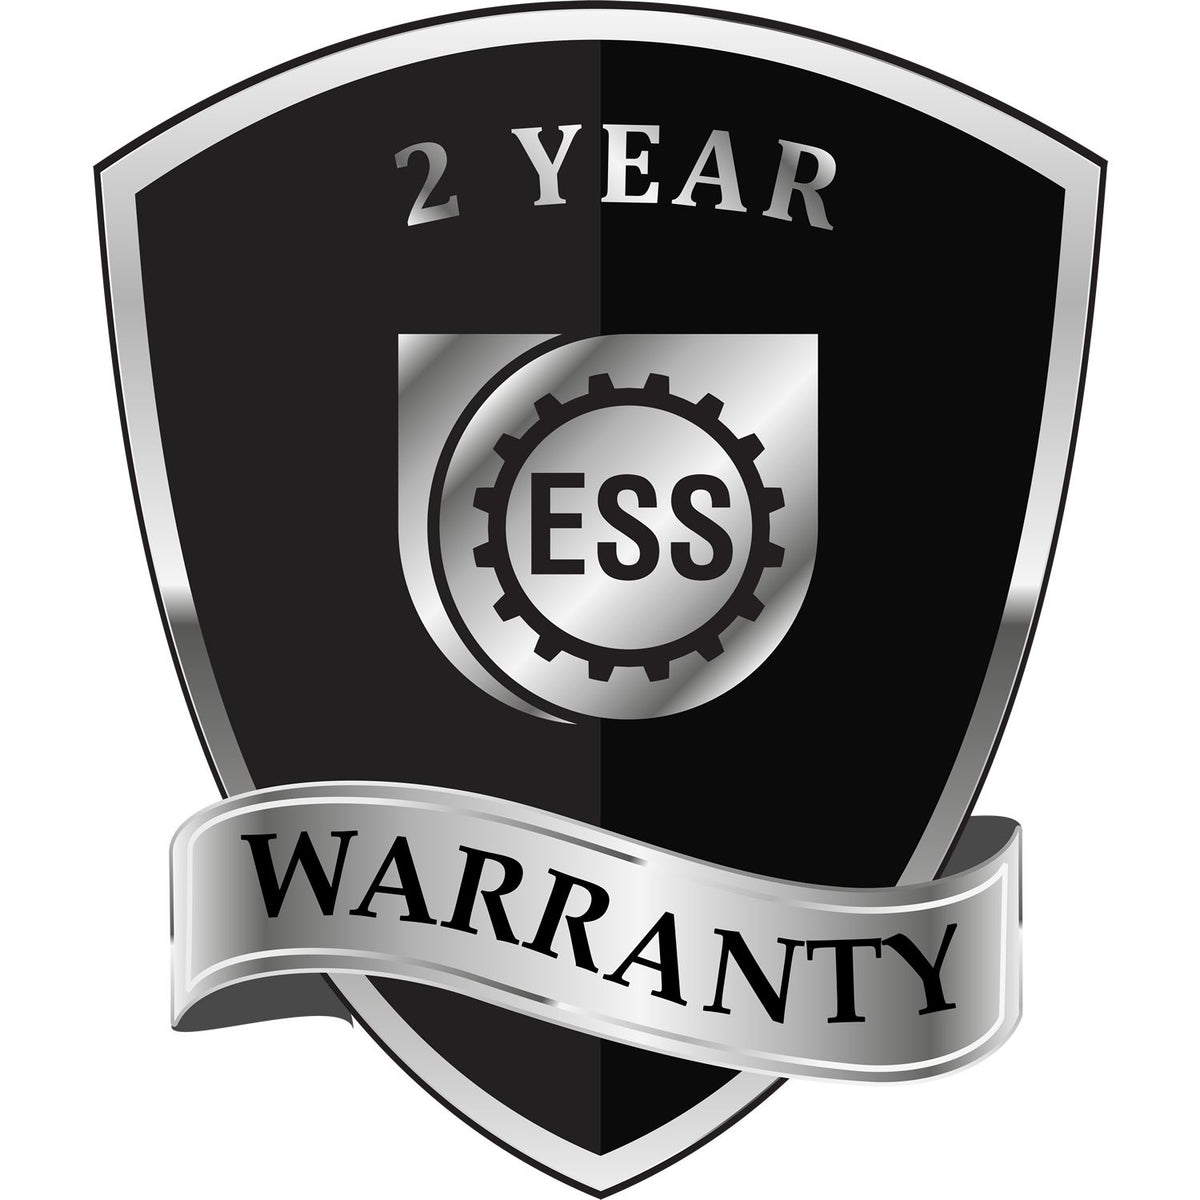 A badge or emblem showing a warranty icon for the Illinois Desk Architect Embossing Seal